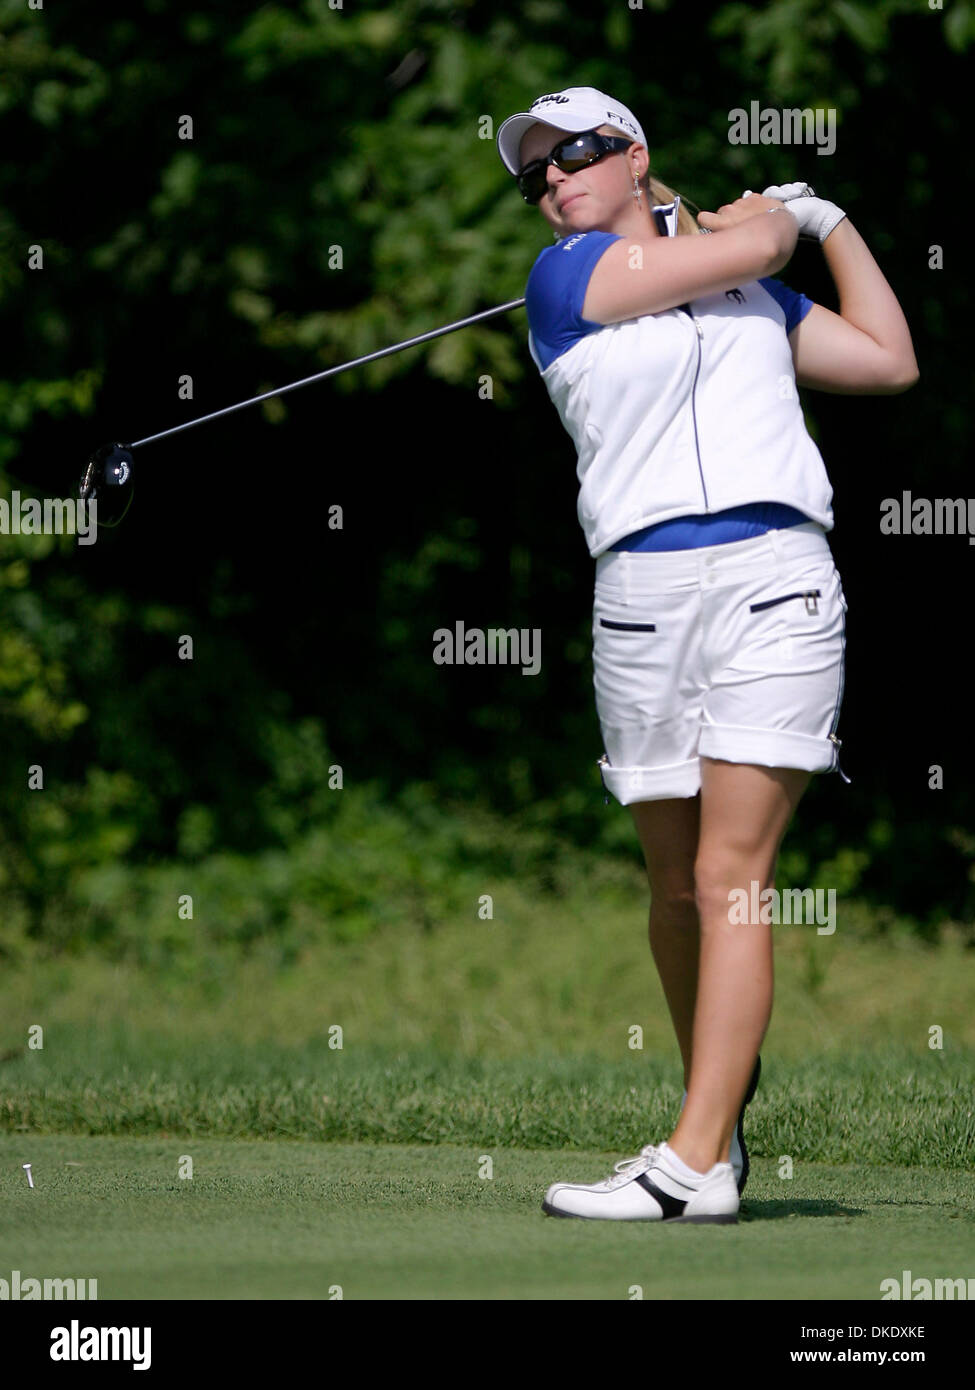 Jun 08, 2007 - Havre de Grace, Maryland, USA - 19 year old MORGAN PRESSEL tees off at hole 4  at the McDonalds LPGA Champaionship event on Thursday. Pressel finished the first round tied for 4th place at 4 under par.  (Credit Image: © James Berglie/ZUMA Press) Stock Photo